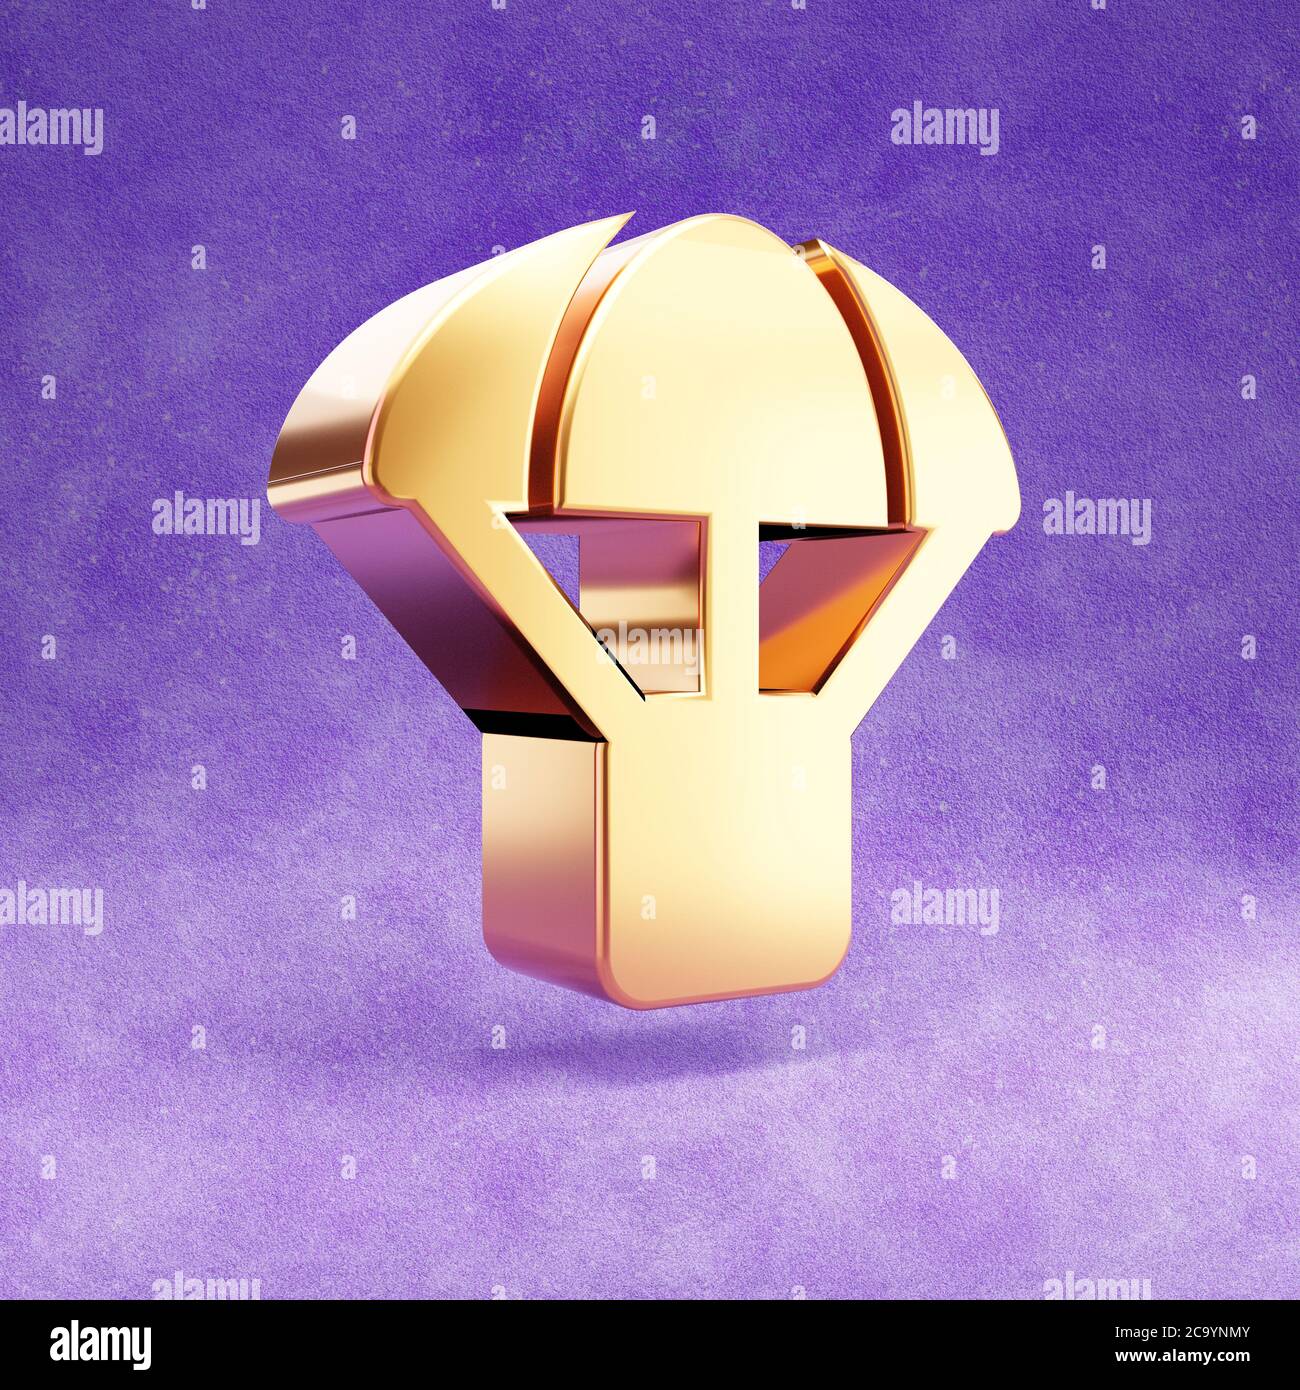 Parachute box icon. Gold glossy airdrop symbol isolated on violet velvet background. Modern icon for website, social media, presentation, design template element. 3D render. Stock Photo